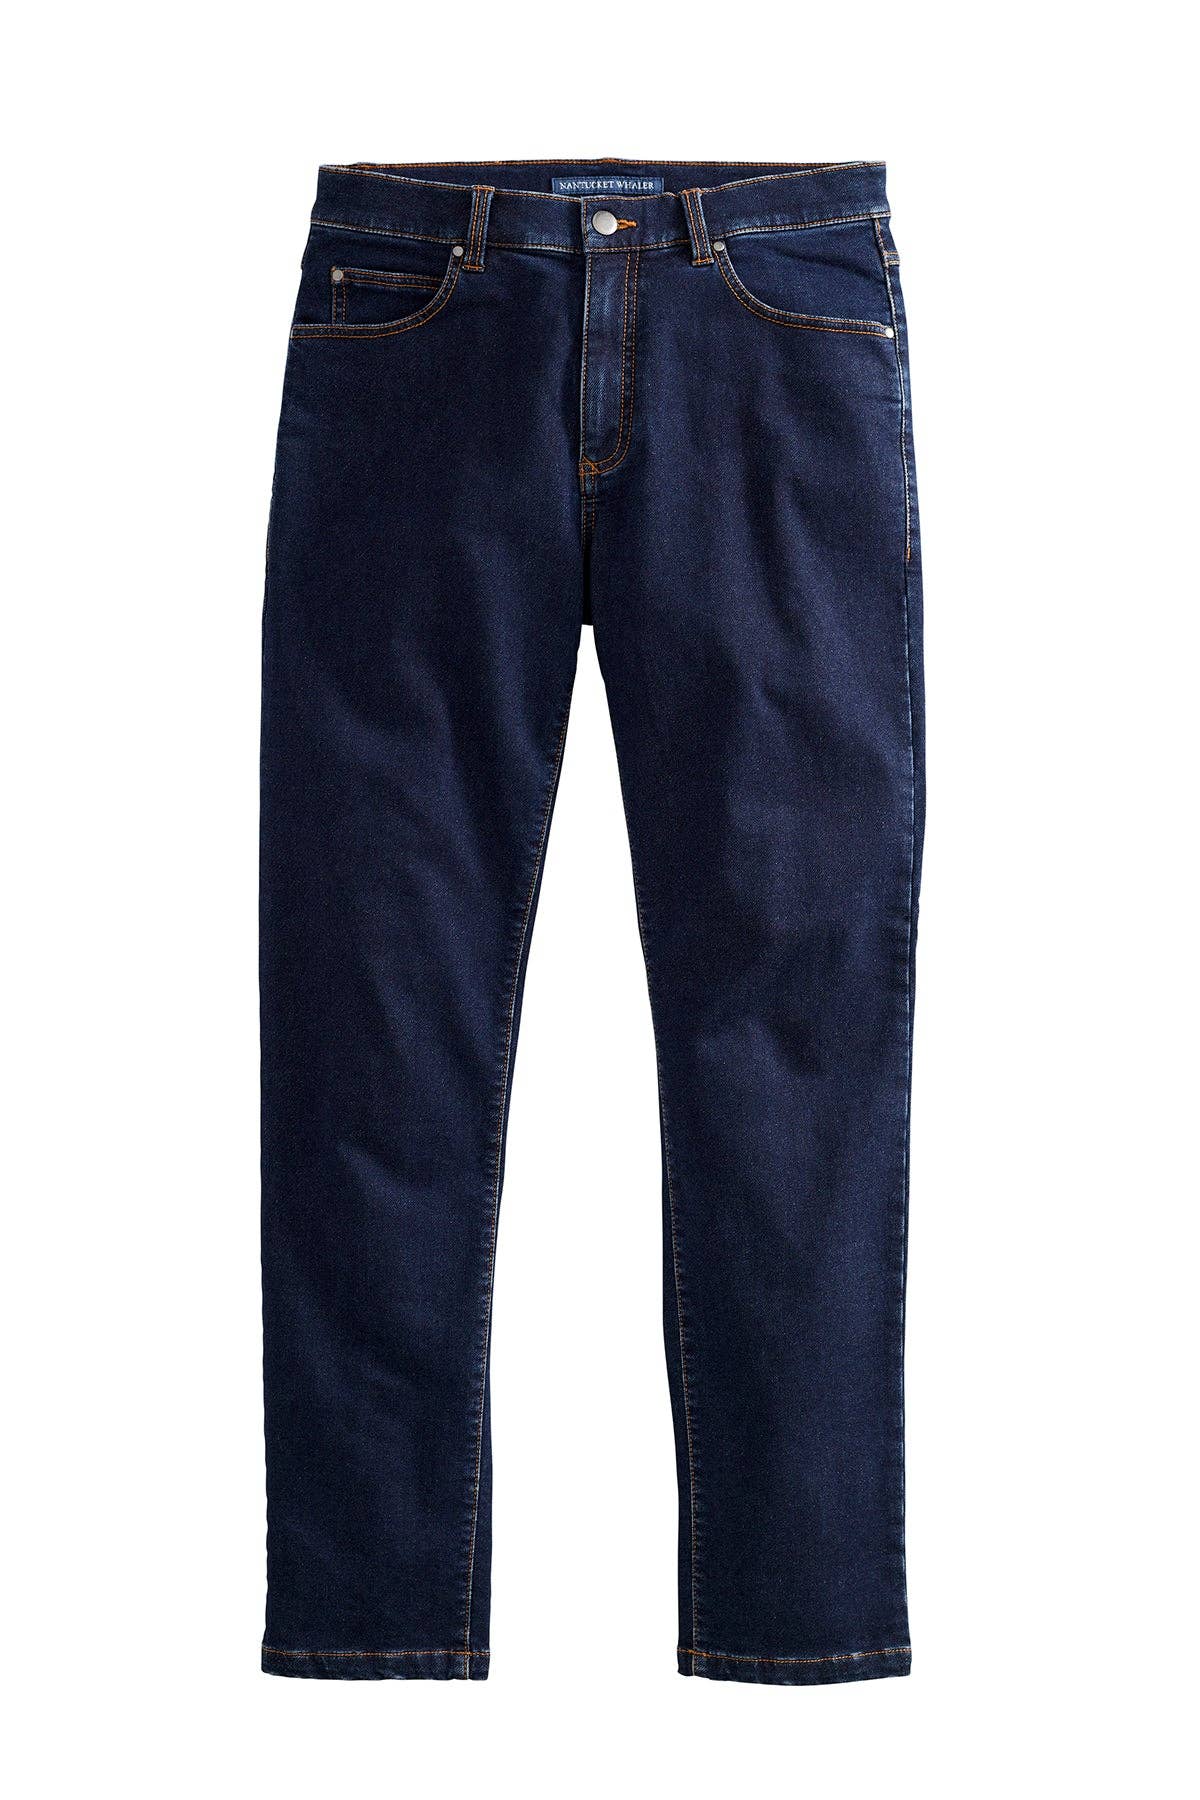 Buy Men's Jeanss Online from Manufacturers and wholesale shops near me in  Mumbai | Anar B2B Business App